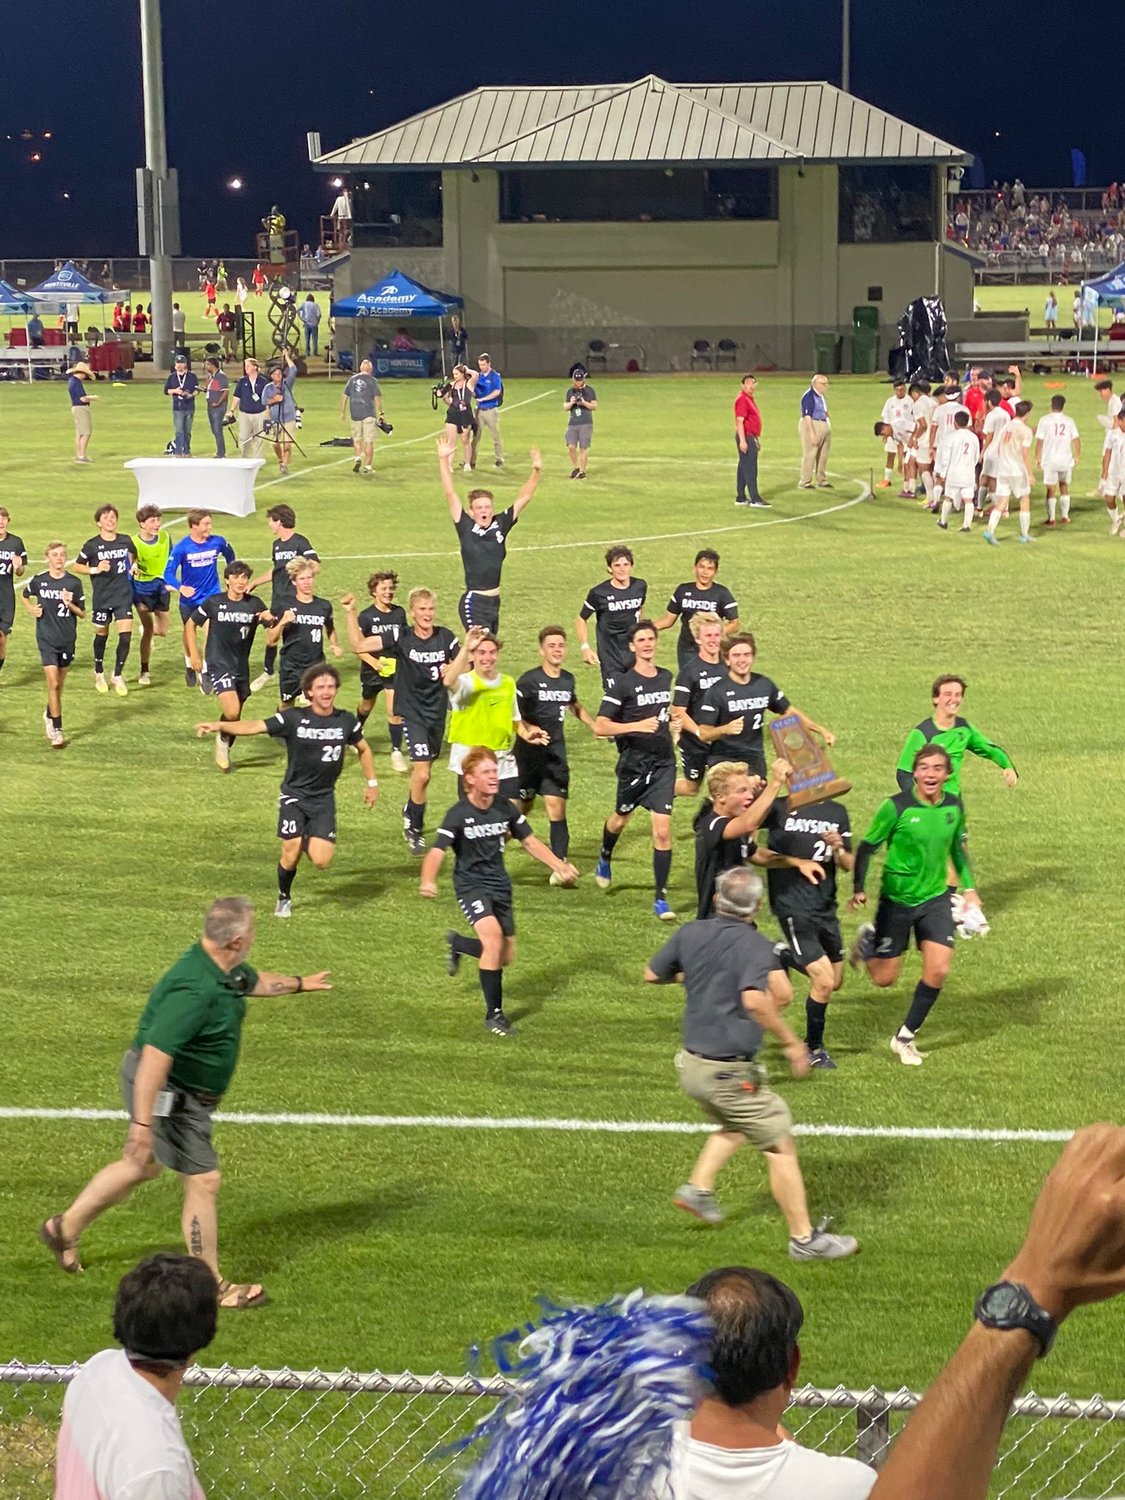 The Bayside Academy Admirals won their third consecutive AHSAA Class 3A State Championship after a 1-0 win over the Collinsville Panthers Friday, May 13, in Huntsville.